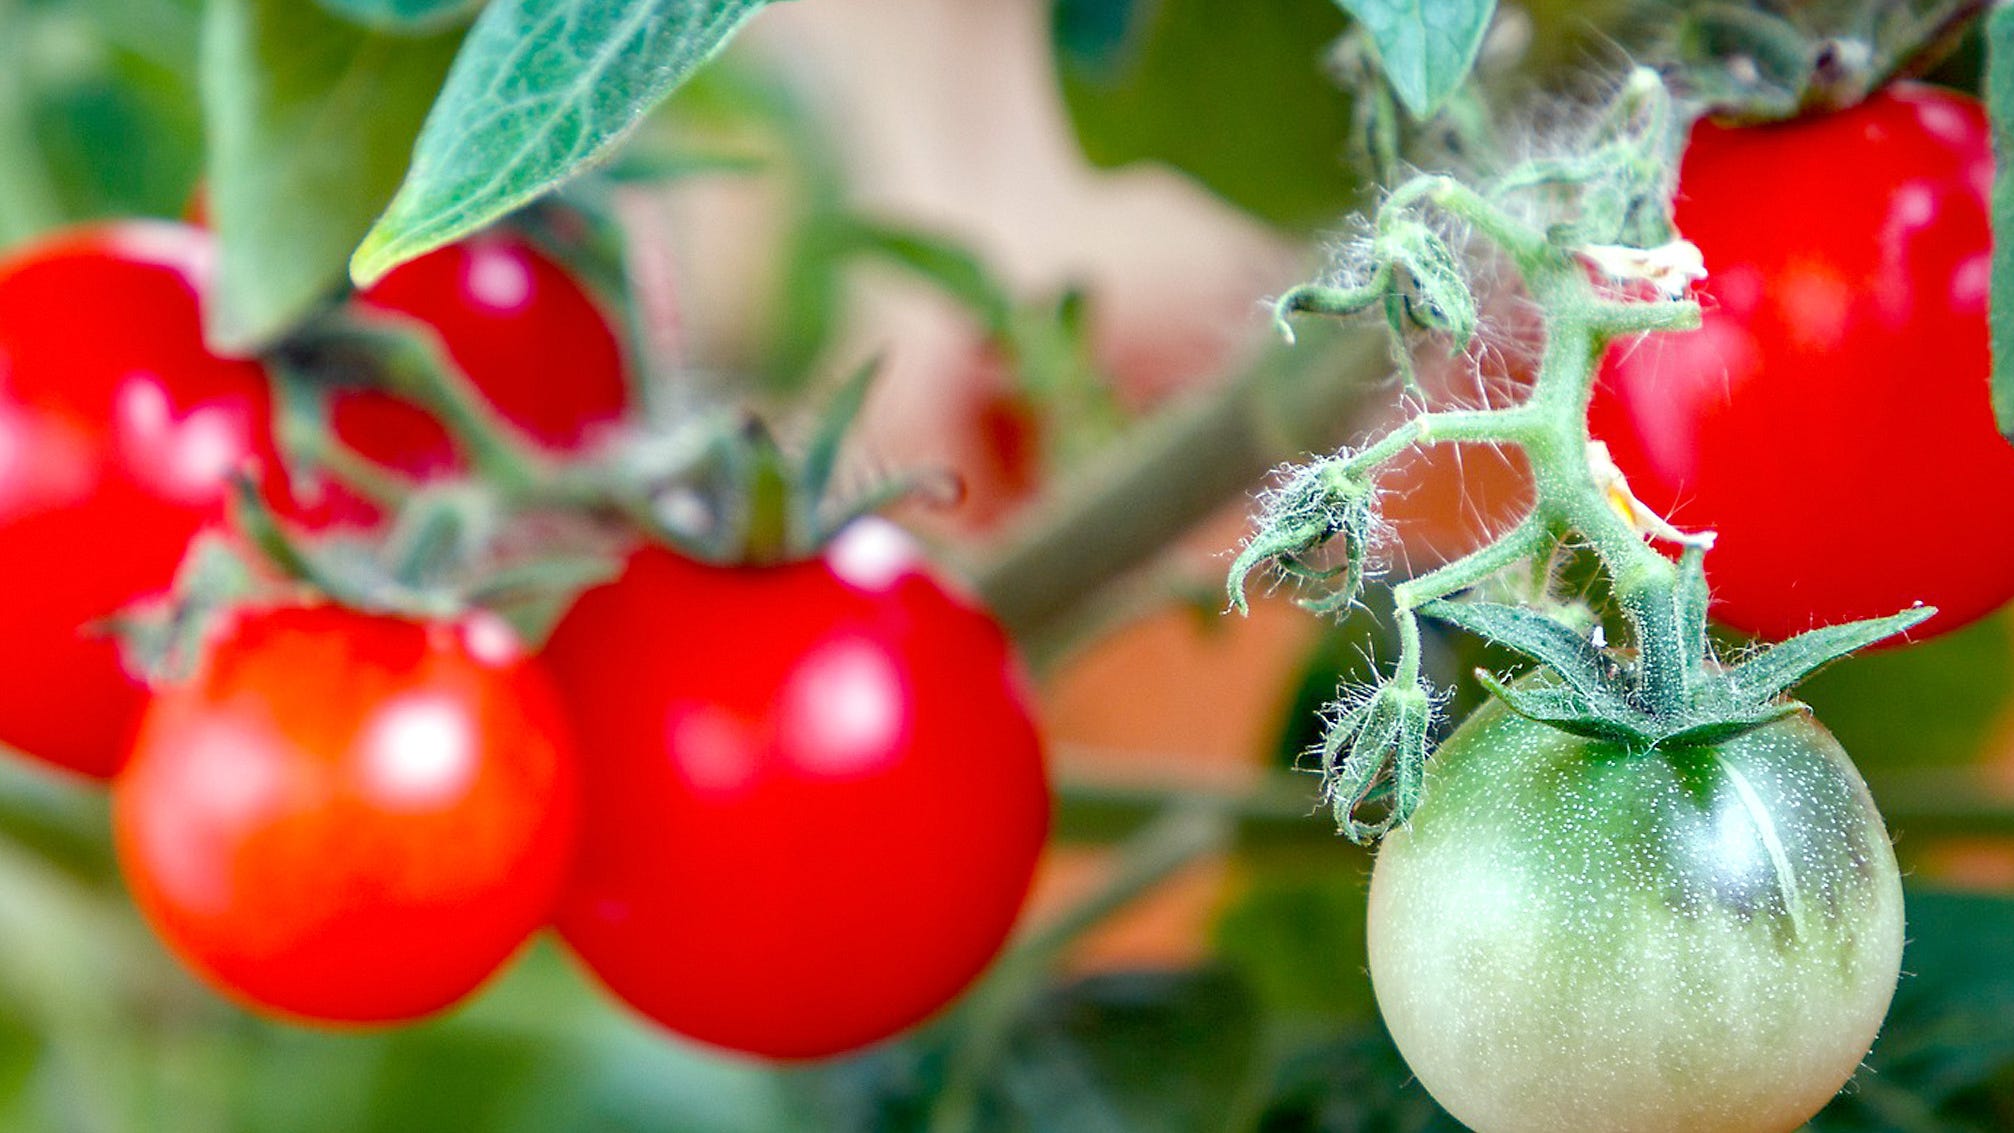 how-often-should-you-water-your-tomatoes-here-are-5-tomato-growing-care-tips